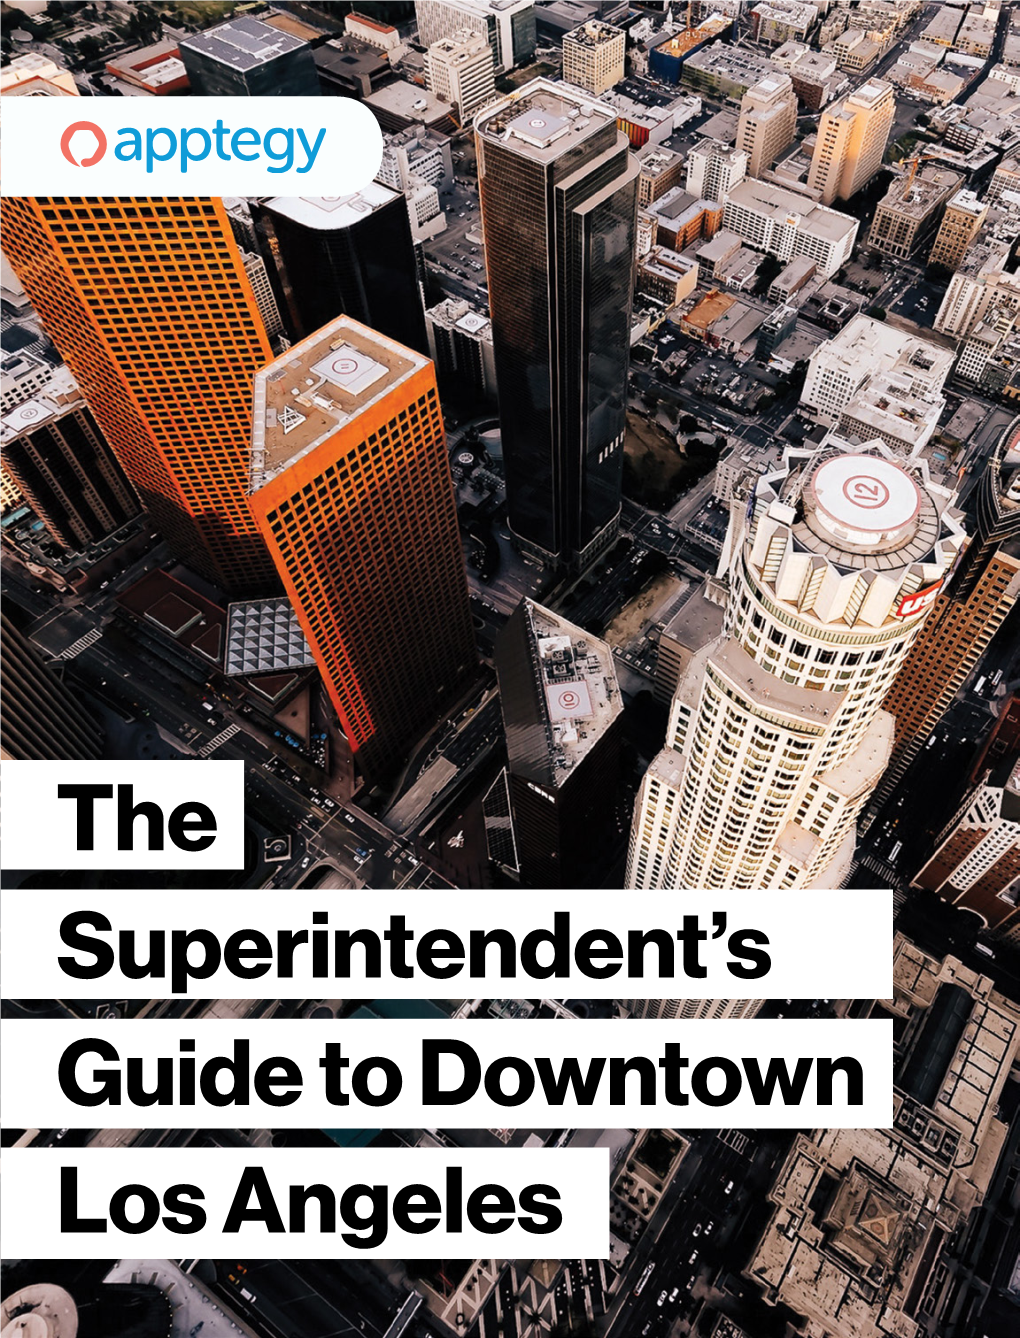 The Superintendent's Guide to Downtown Los Angeles